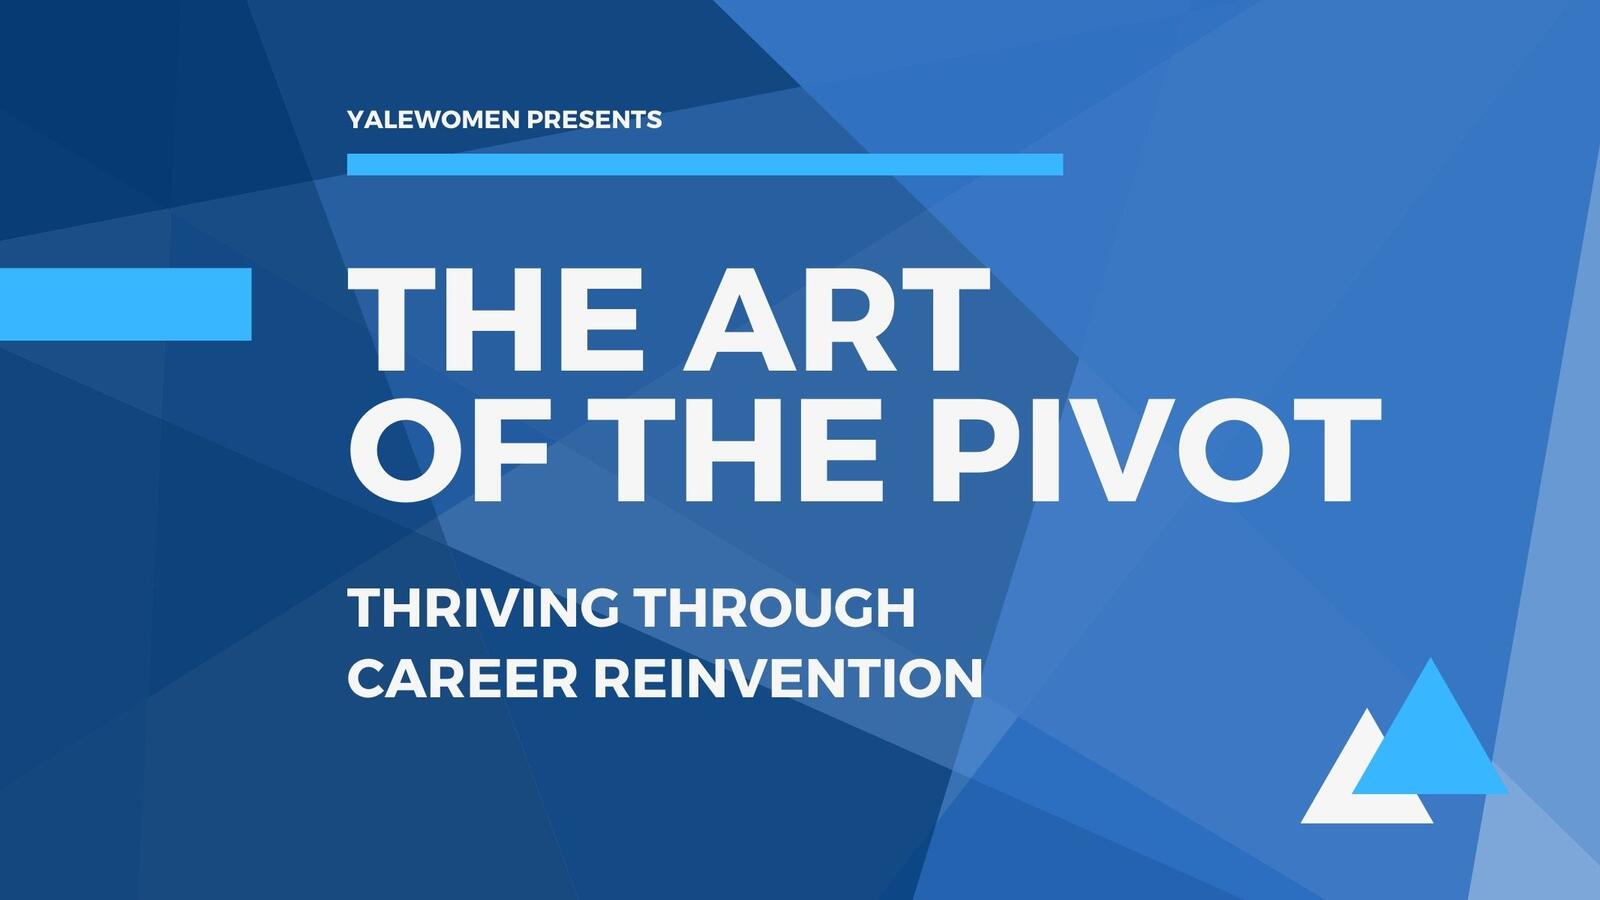 YaleWomen presents the Art of the Pivot: Thriving Through Career Reinvention